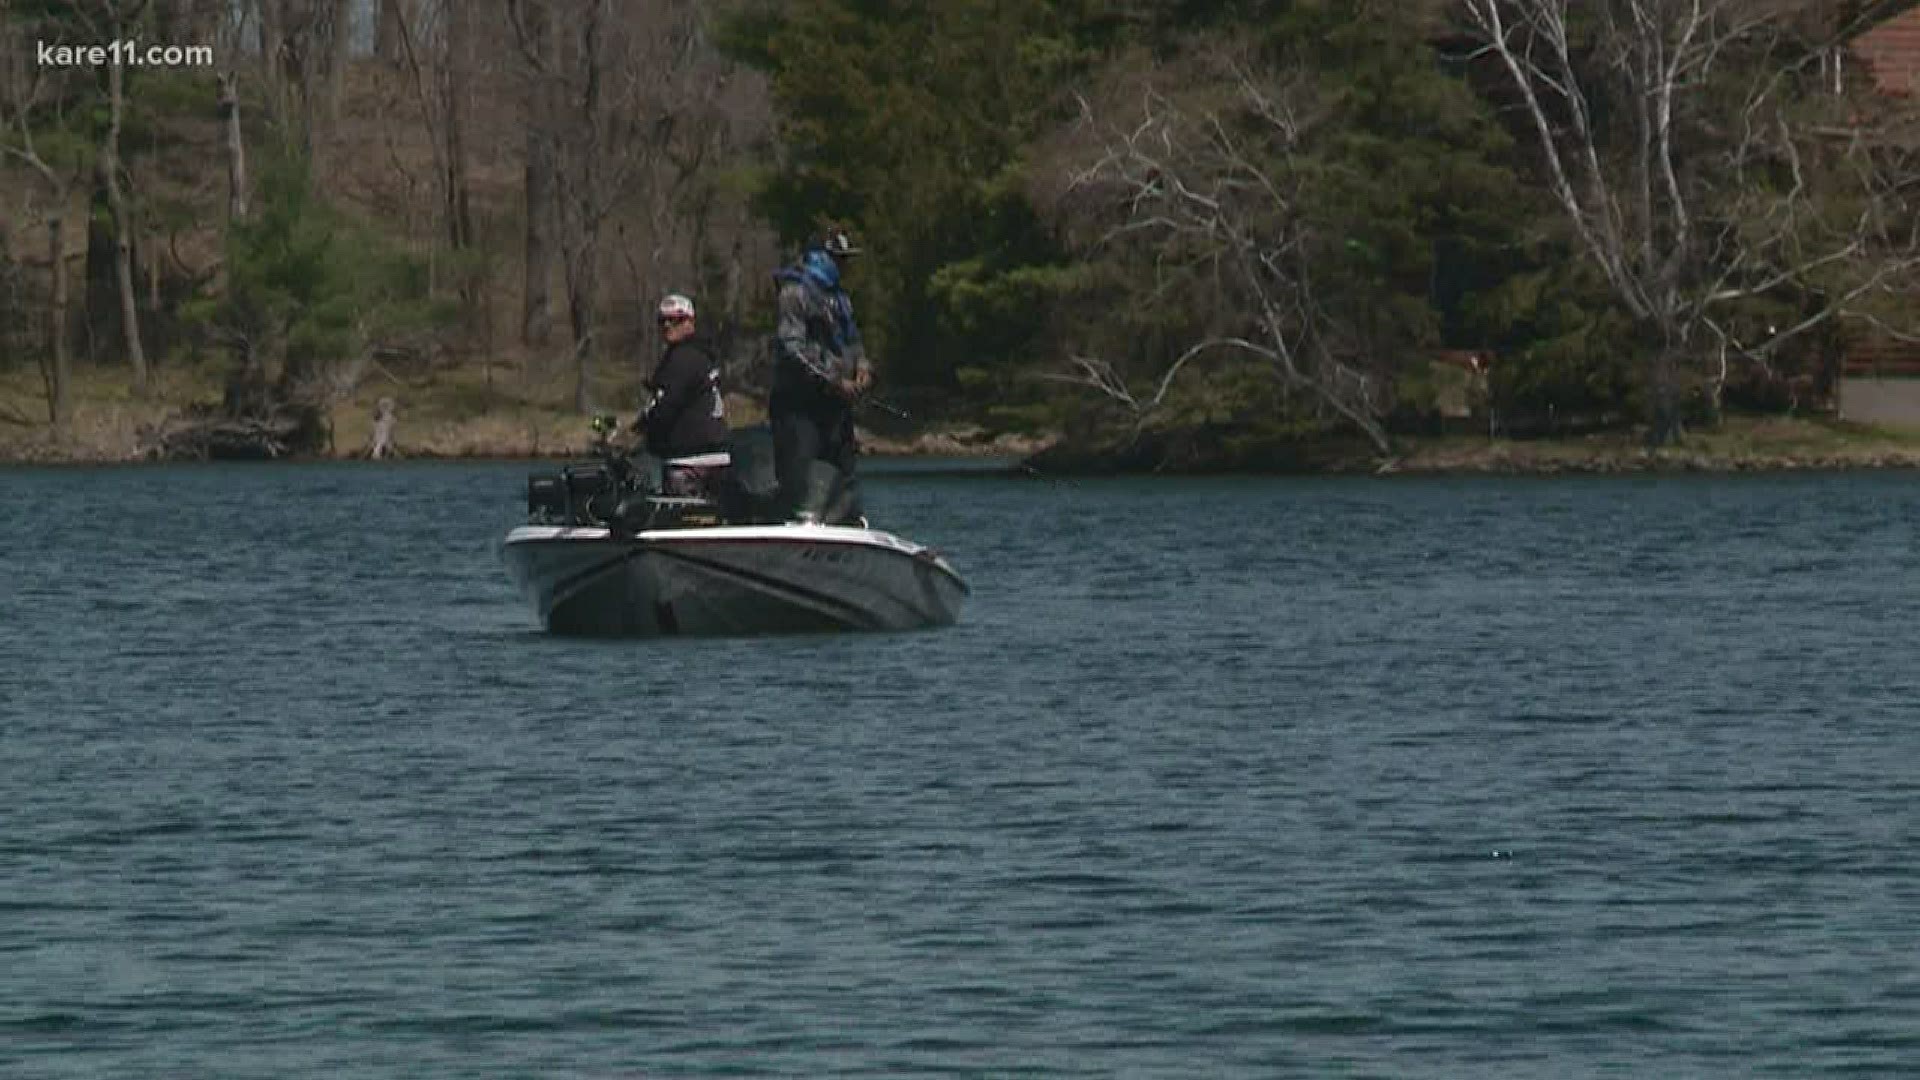 Anglers were asked to practice social distancing out on the water. A conservation warden in Balsam Lake said compliance wasn't a problem Saturday.